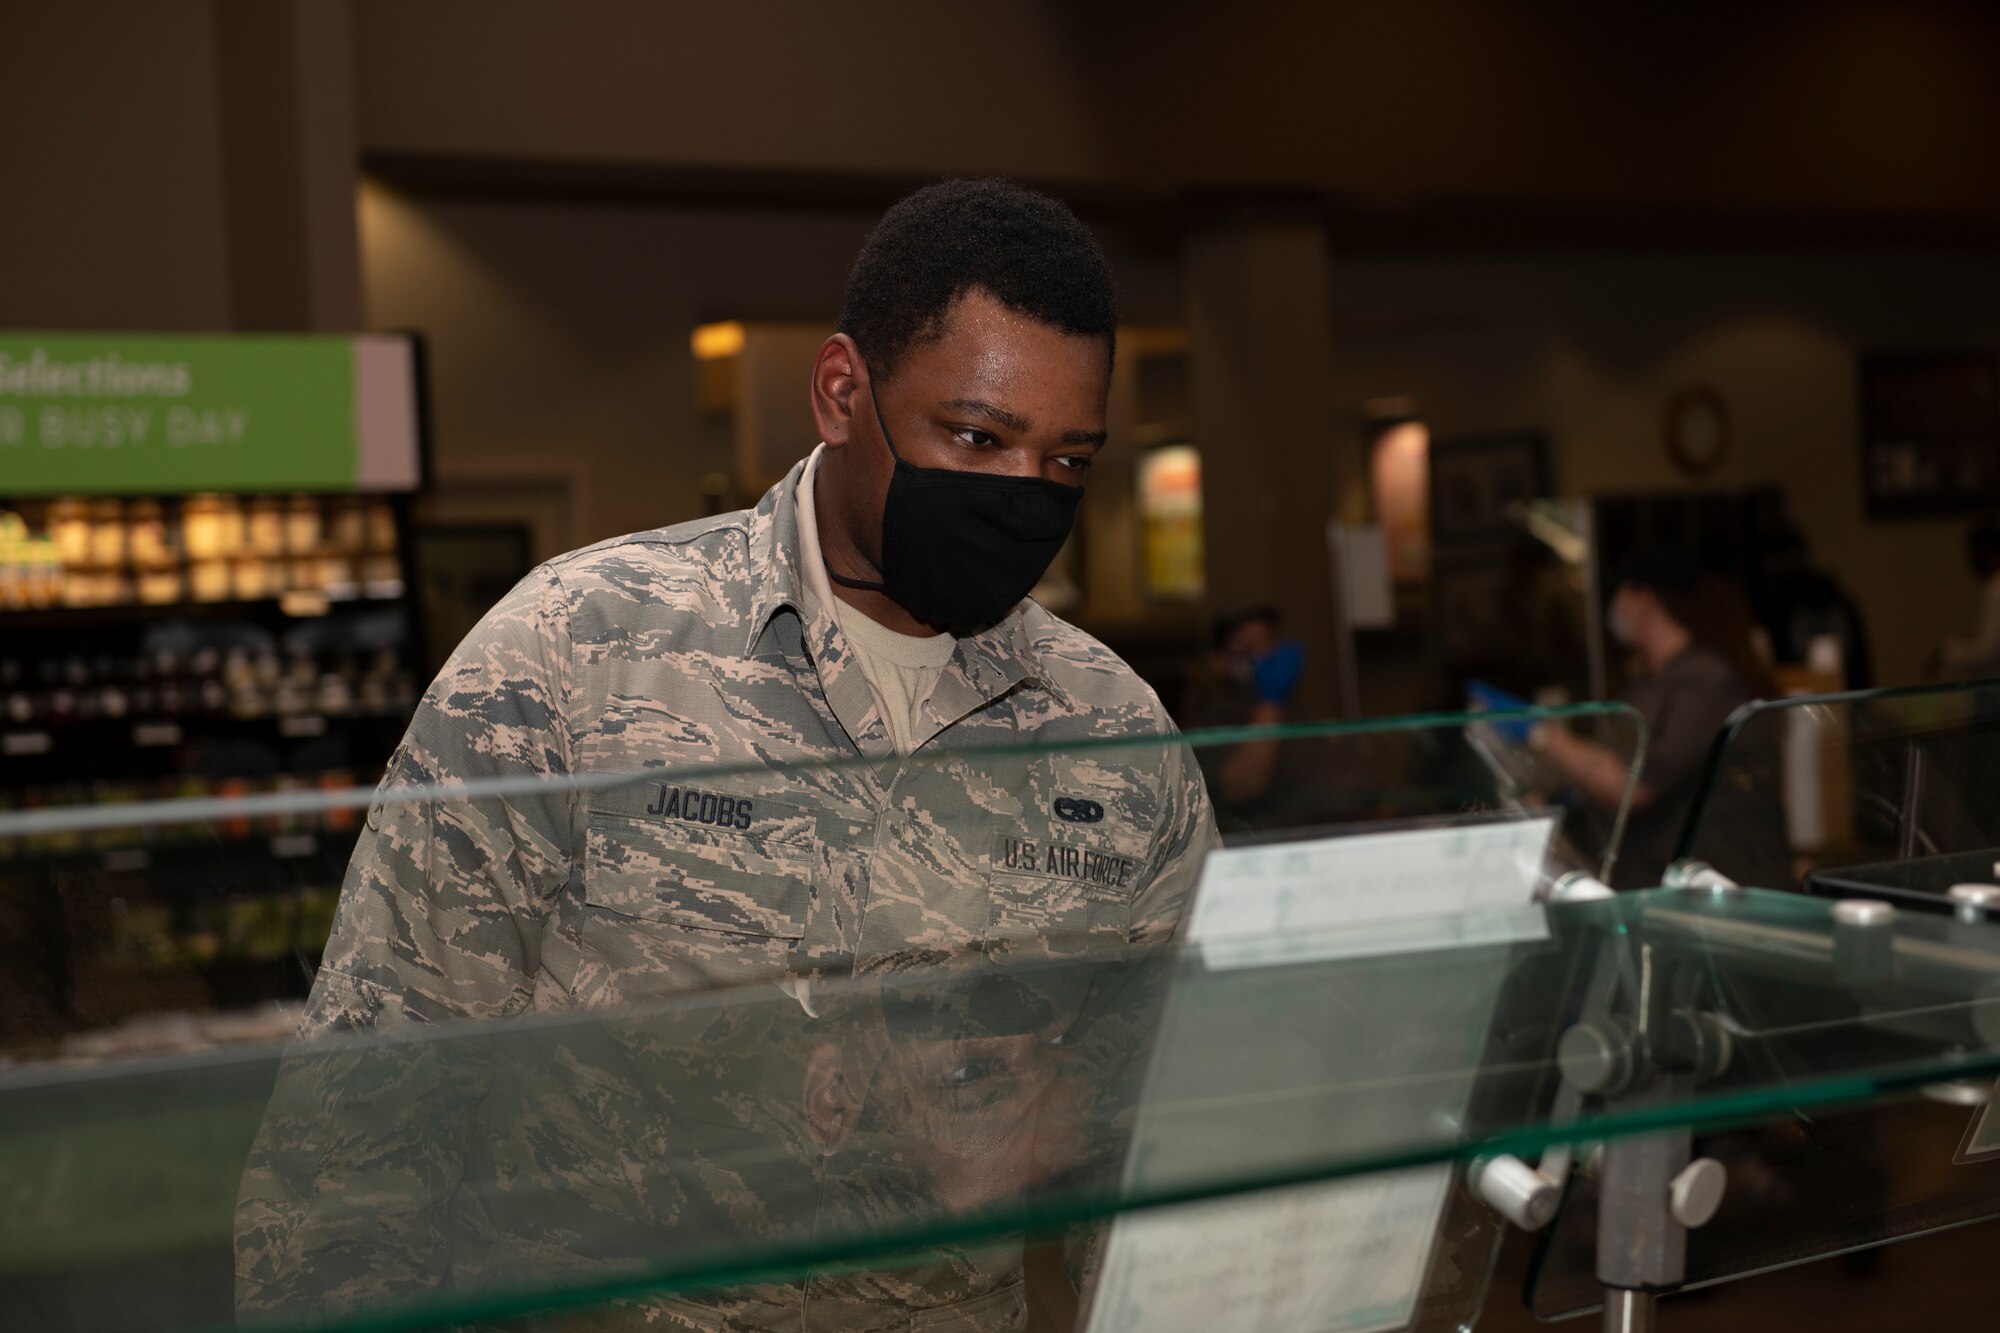 Airman 1st Class Cordell Jacobs, 60th Maintenance Squadron aircraft fuel systems journeyman, waits for his food inside the Monarch Dining Facility April 24, 2020, at Travis Air Force Base, California. The Monarch has implemented procedures to prevent the spread of the coronavirus including restricting access to service members only and requiring all patrons to wear masks. (U.S. Air Force photo by Tech. Sgt. James Hodgman)